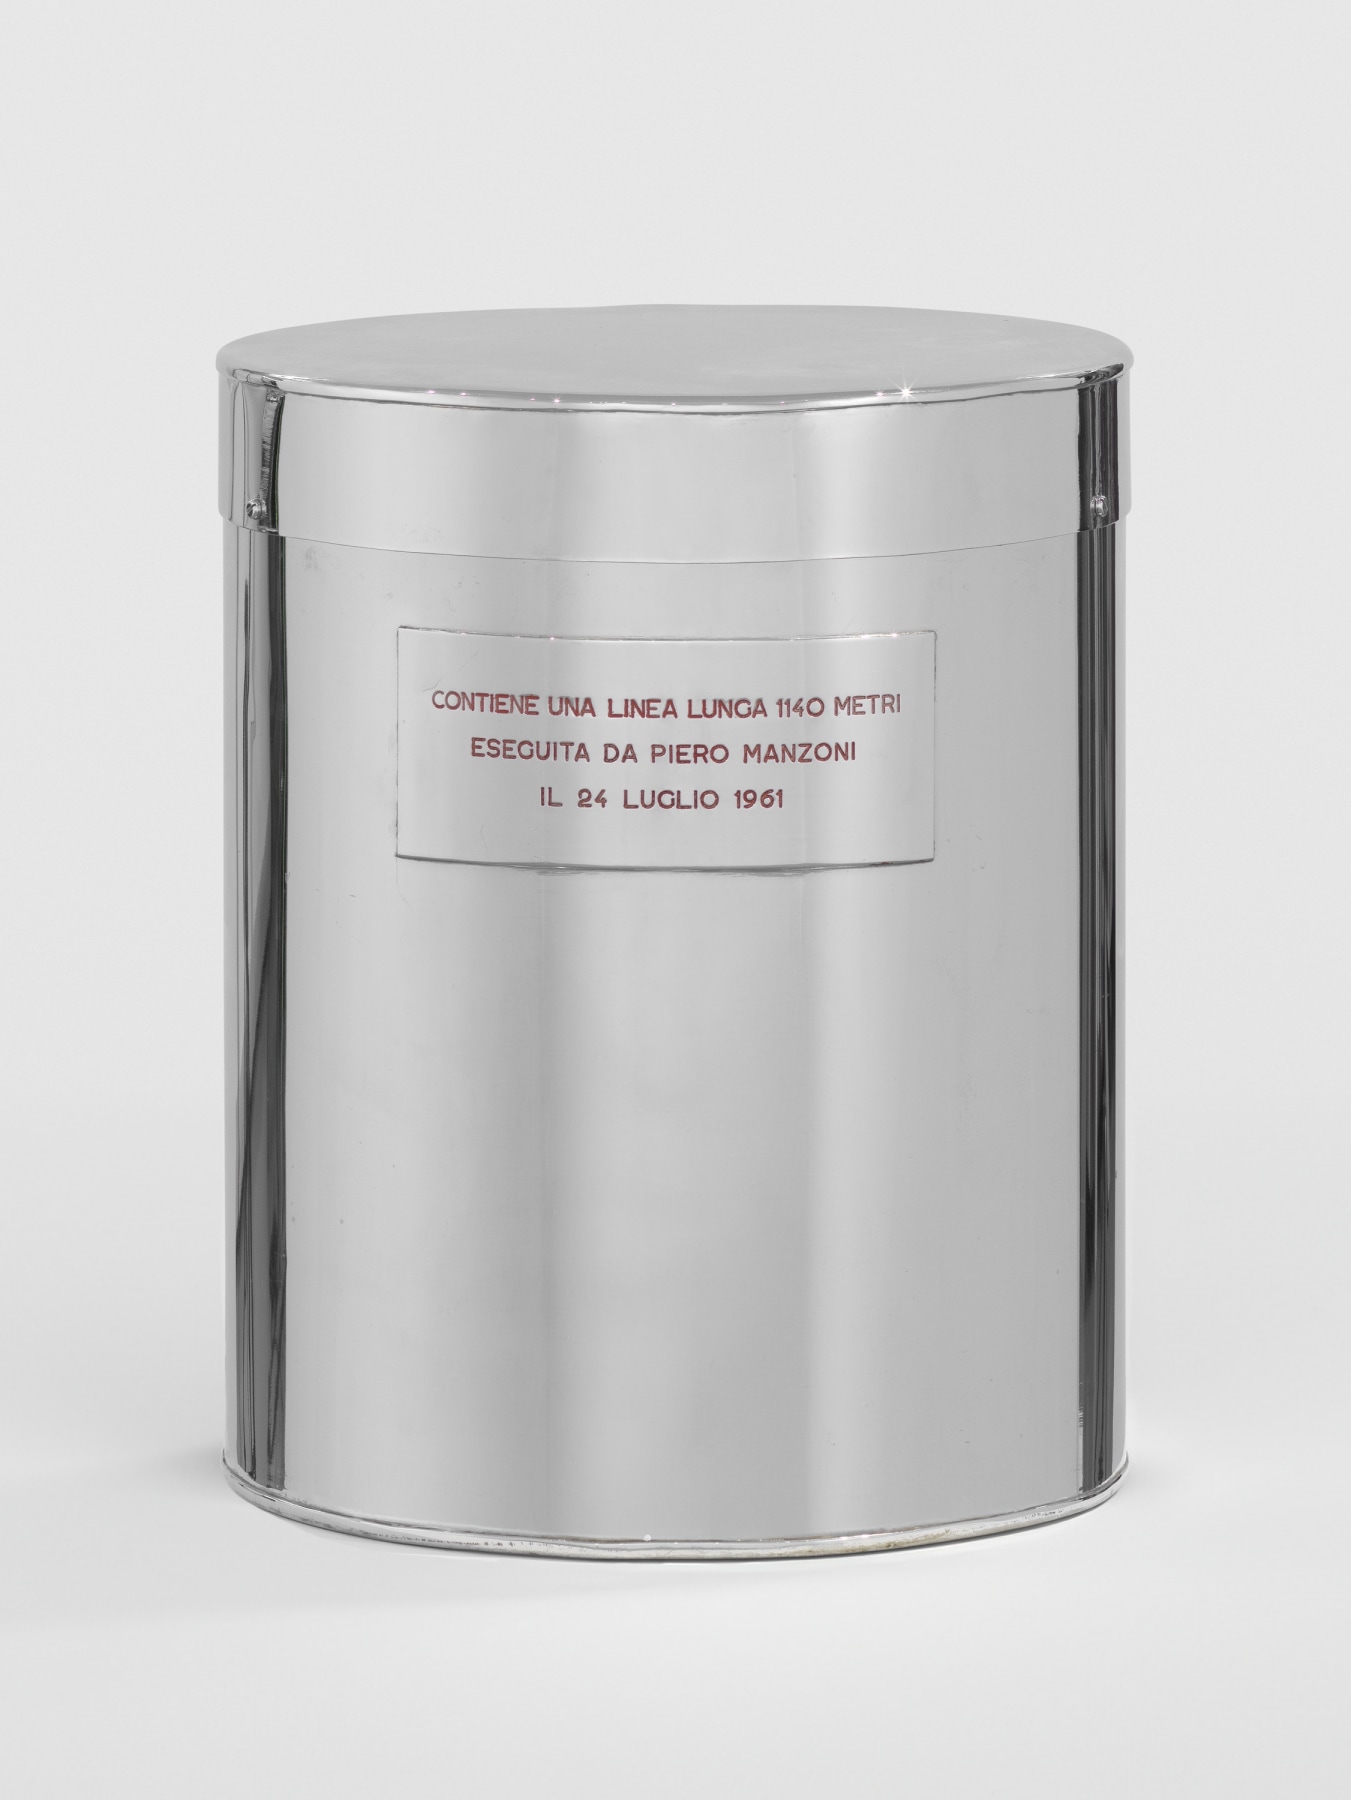 Piero Manzoni

&amp;ldquo;Linea m. 1140&amp;rdquo;, 1961

Ink on paper in chrome canister

20 1/2 x 16 1/2 x 16 1/2 inches

52 x 42 x 42 cm

MAN 41

$6,000,000